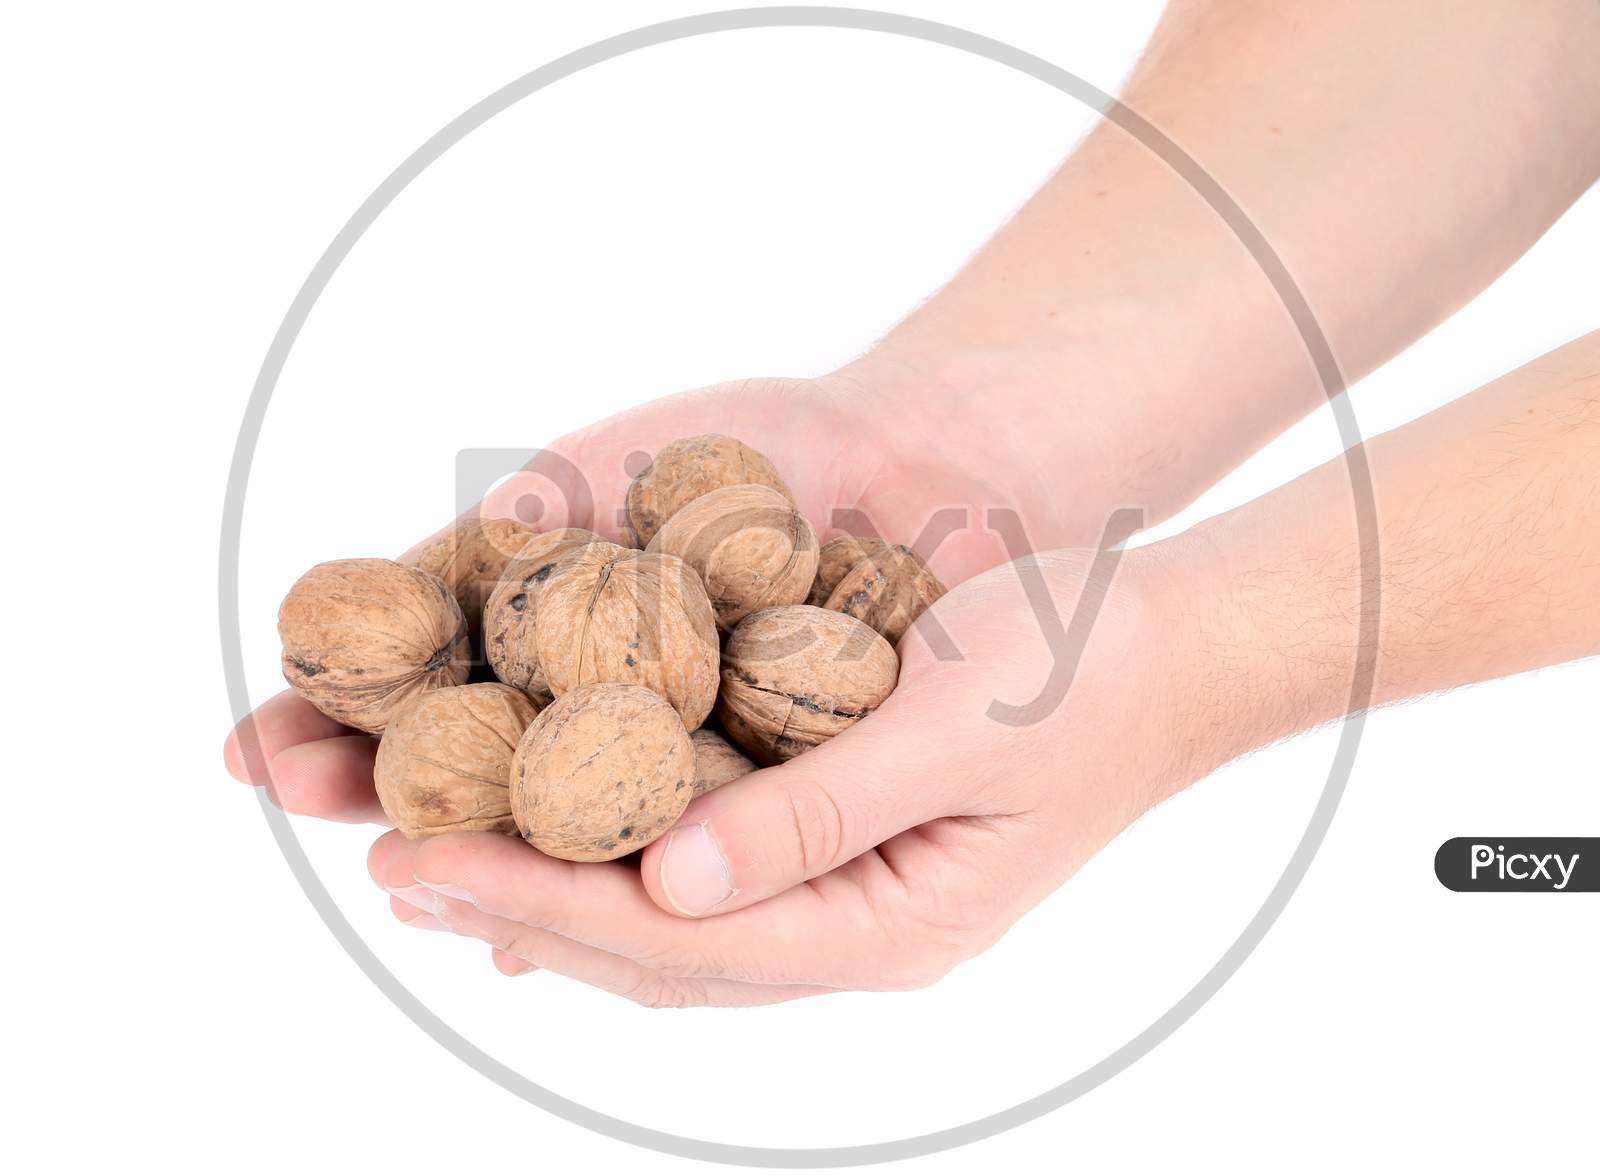 Bunch Of Walnuts In Hands. Isolated On A White Background.